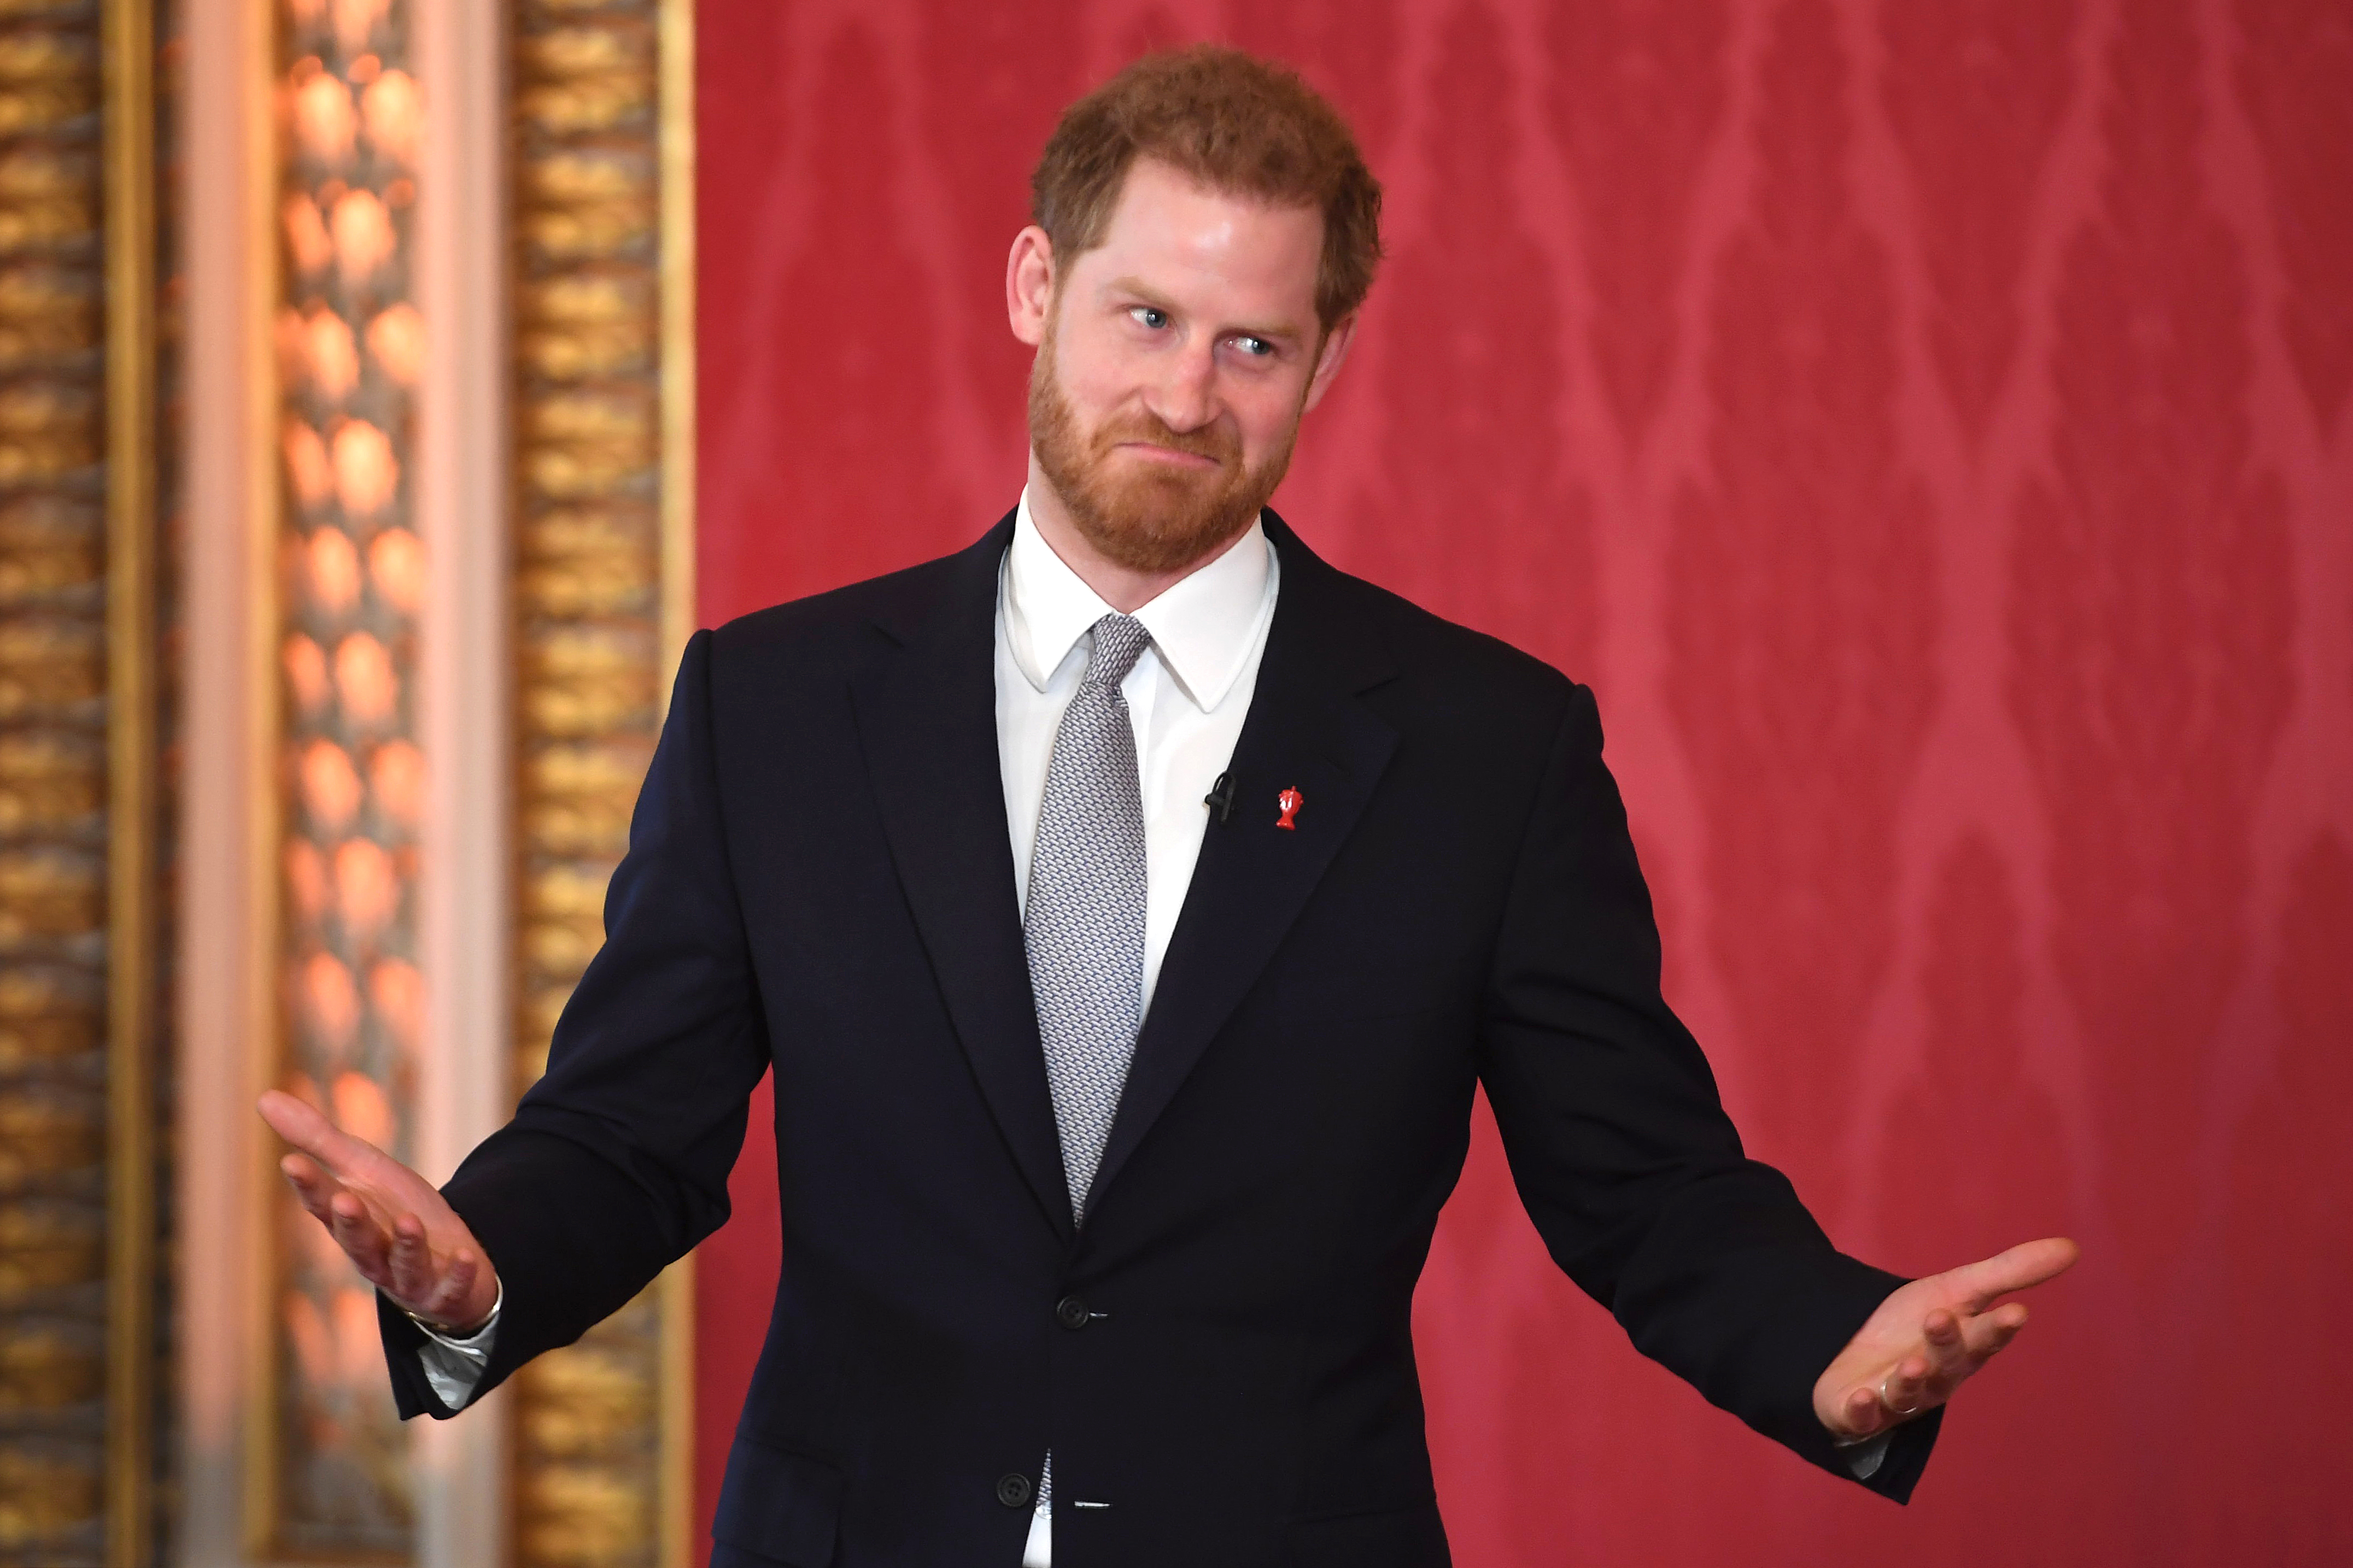 Prince Harry at Buckingham Palace on January 16, 2020 in London, England. | Source: Getty Images